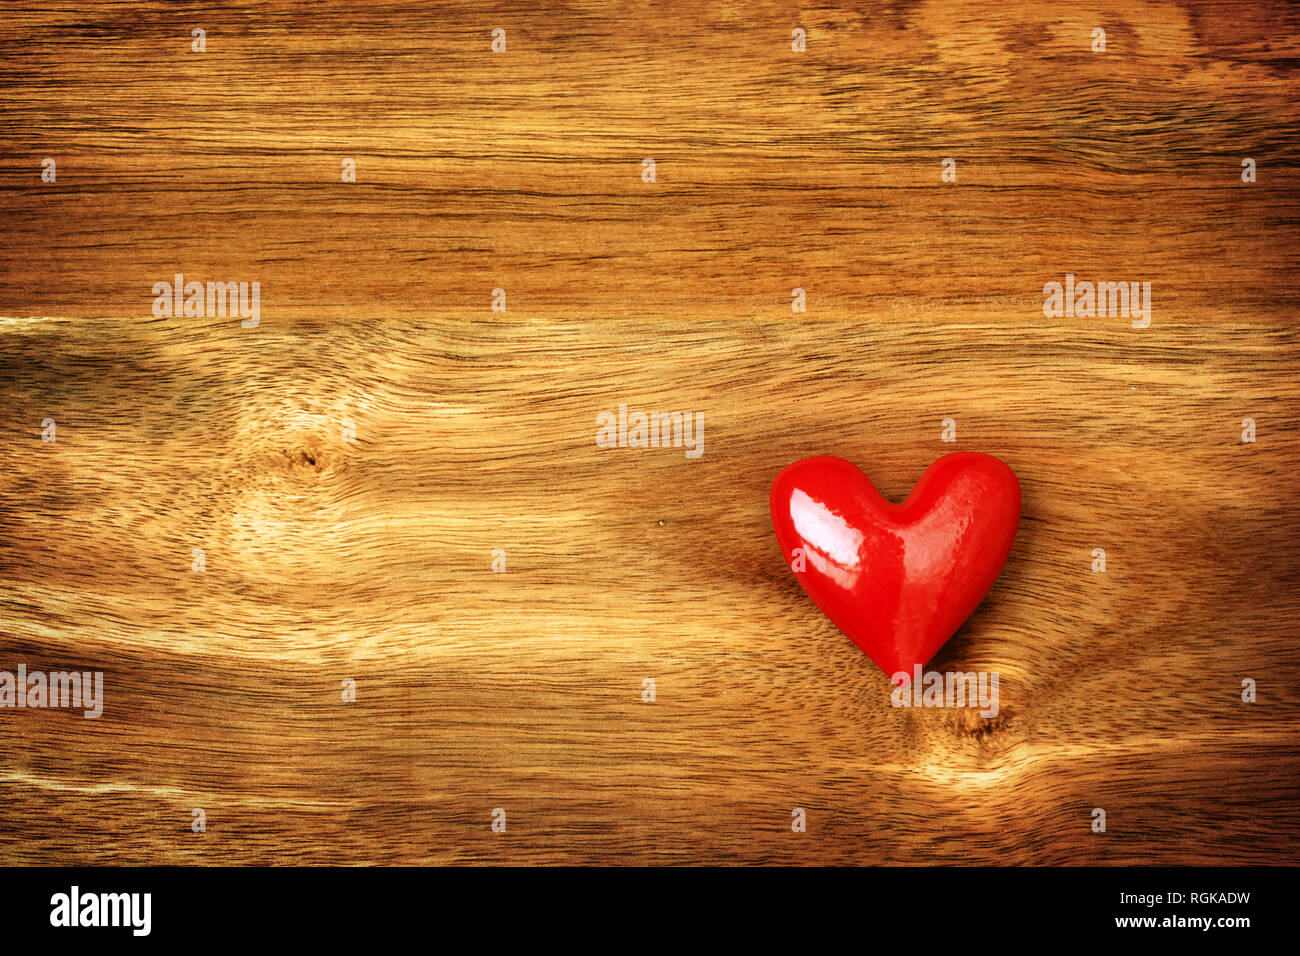 Shiny red heart on wooden background Stock Photo